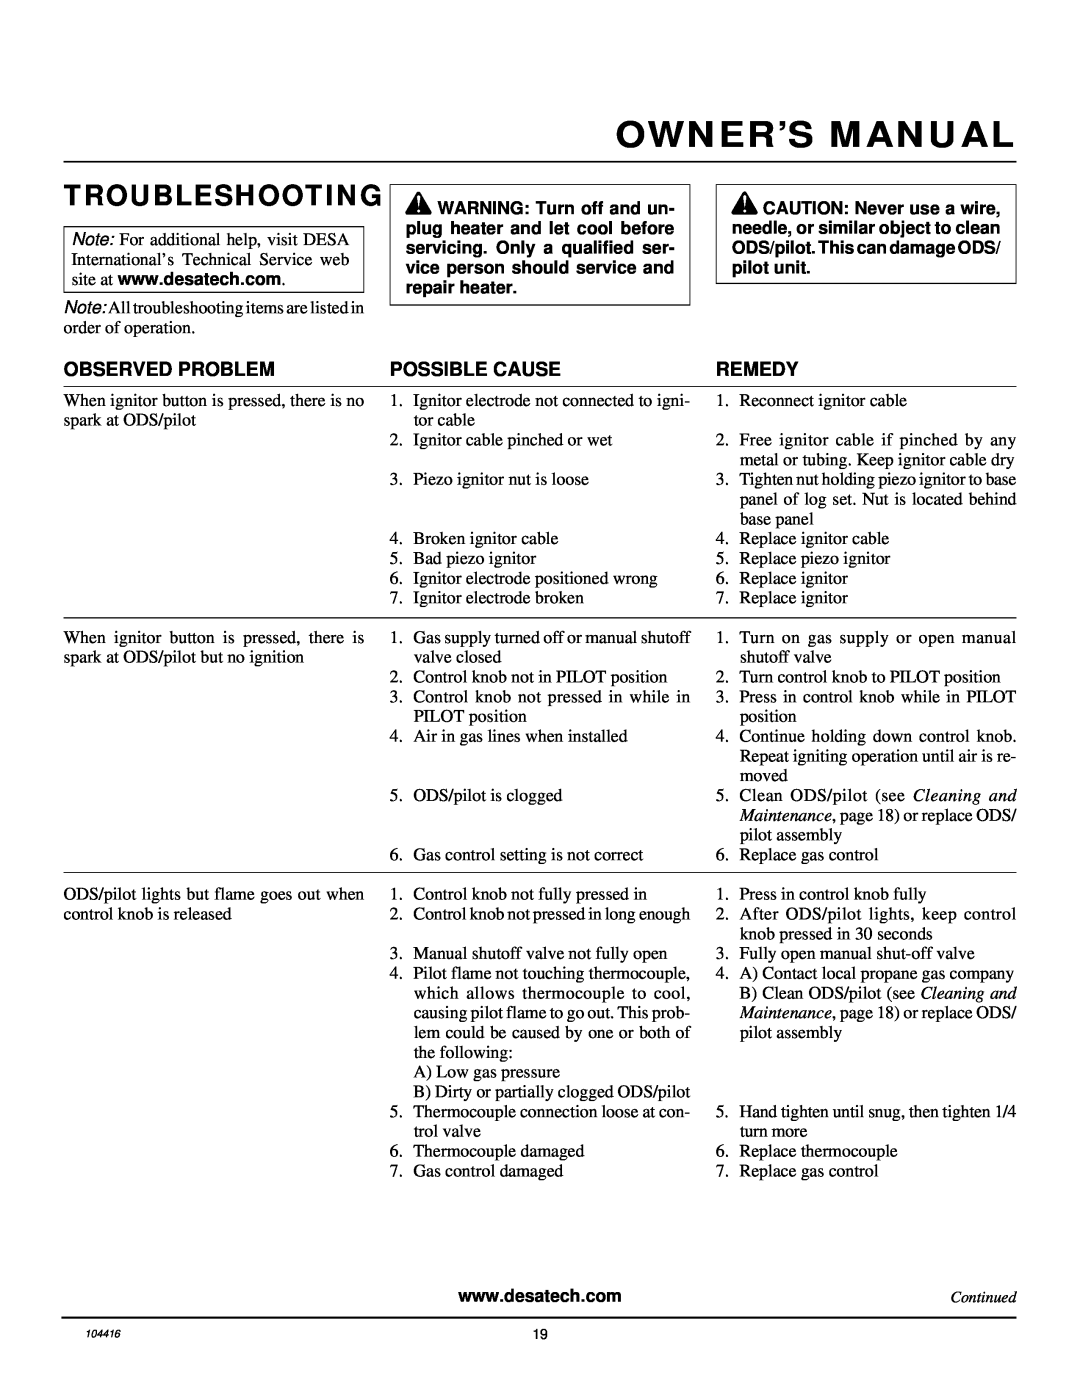 Desa VS30NRA, CFS18NRA, VS24NRA, VS18NRA installation manual Troubleshooting, Observed Problem, Possible Cause, Remedy 